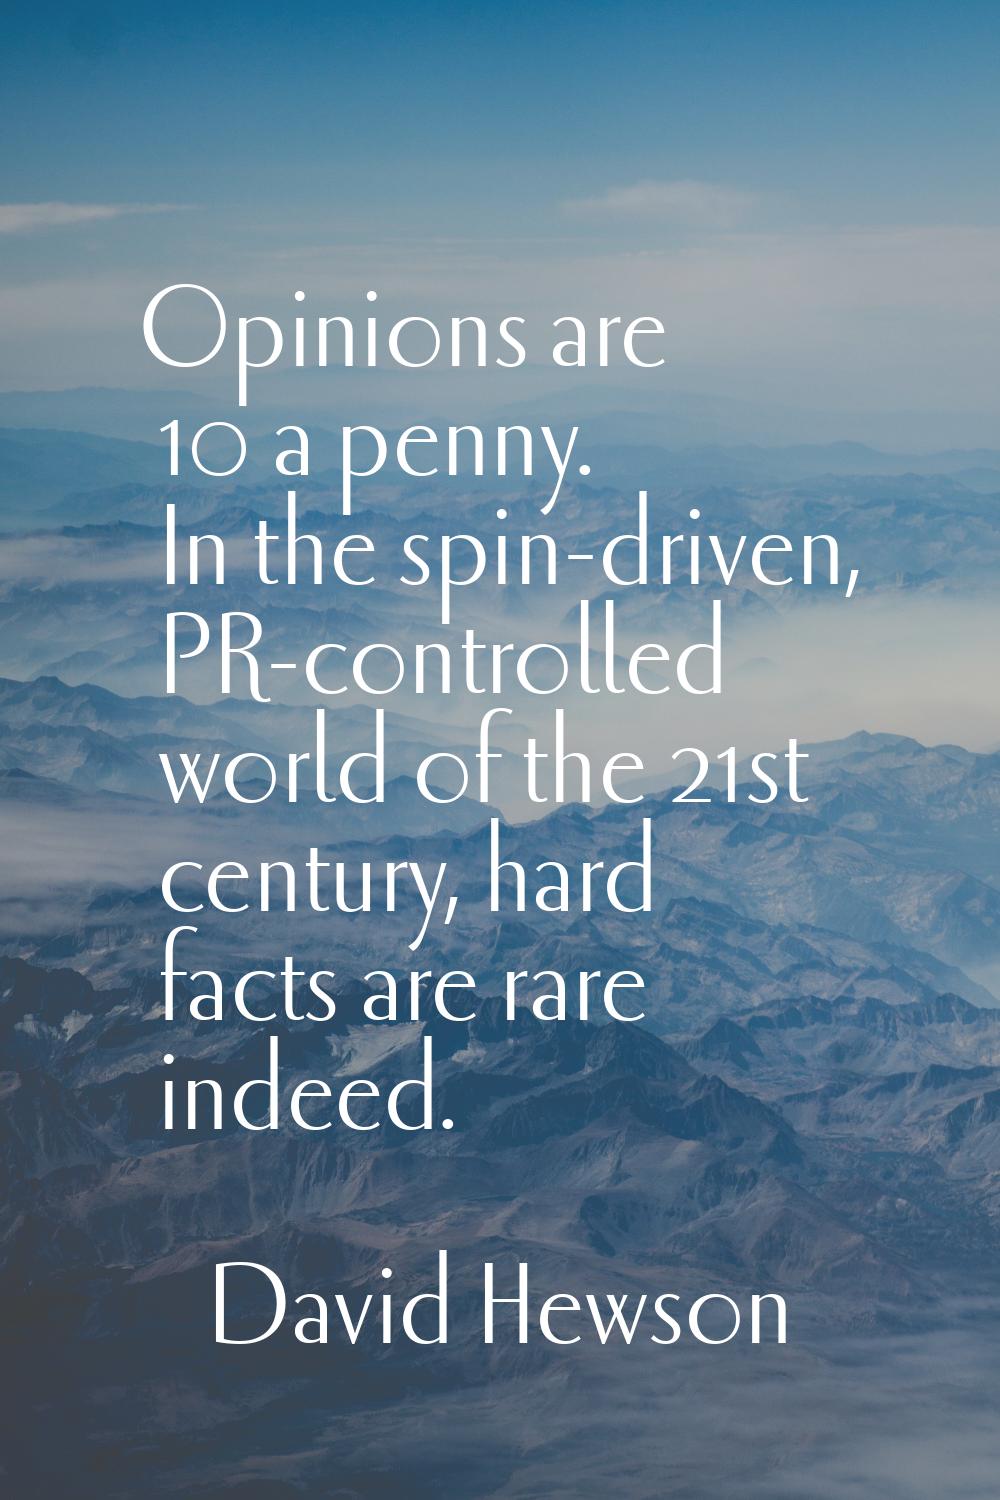 Opinions are 10 a penny. In the spin-driven, PR-controlled world of the 21st century, hard facts ar